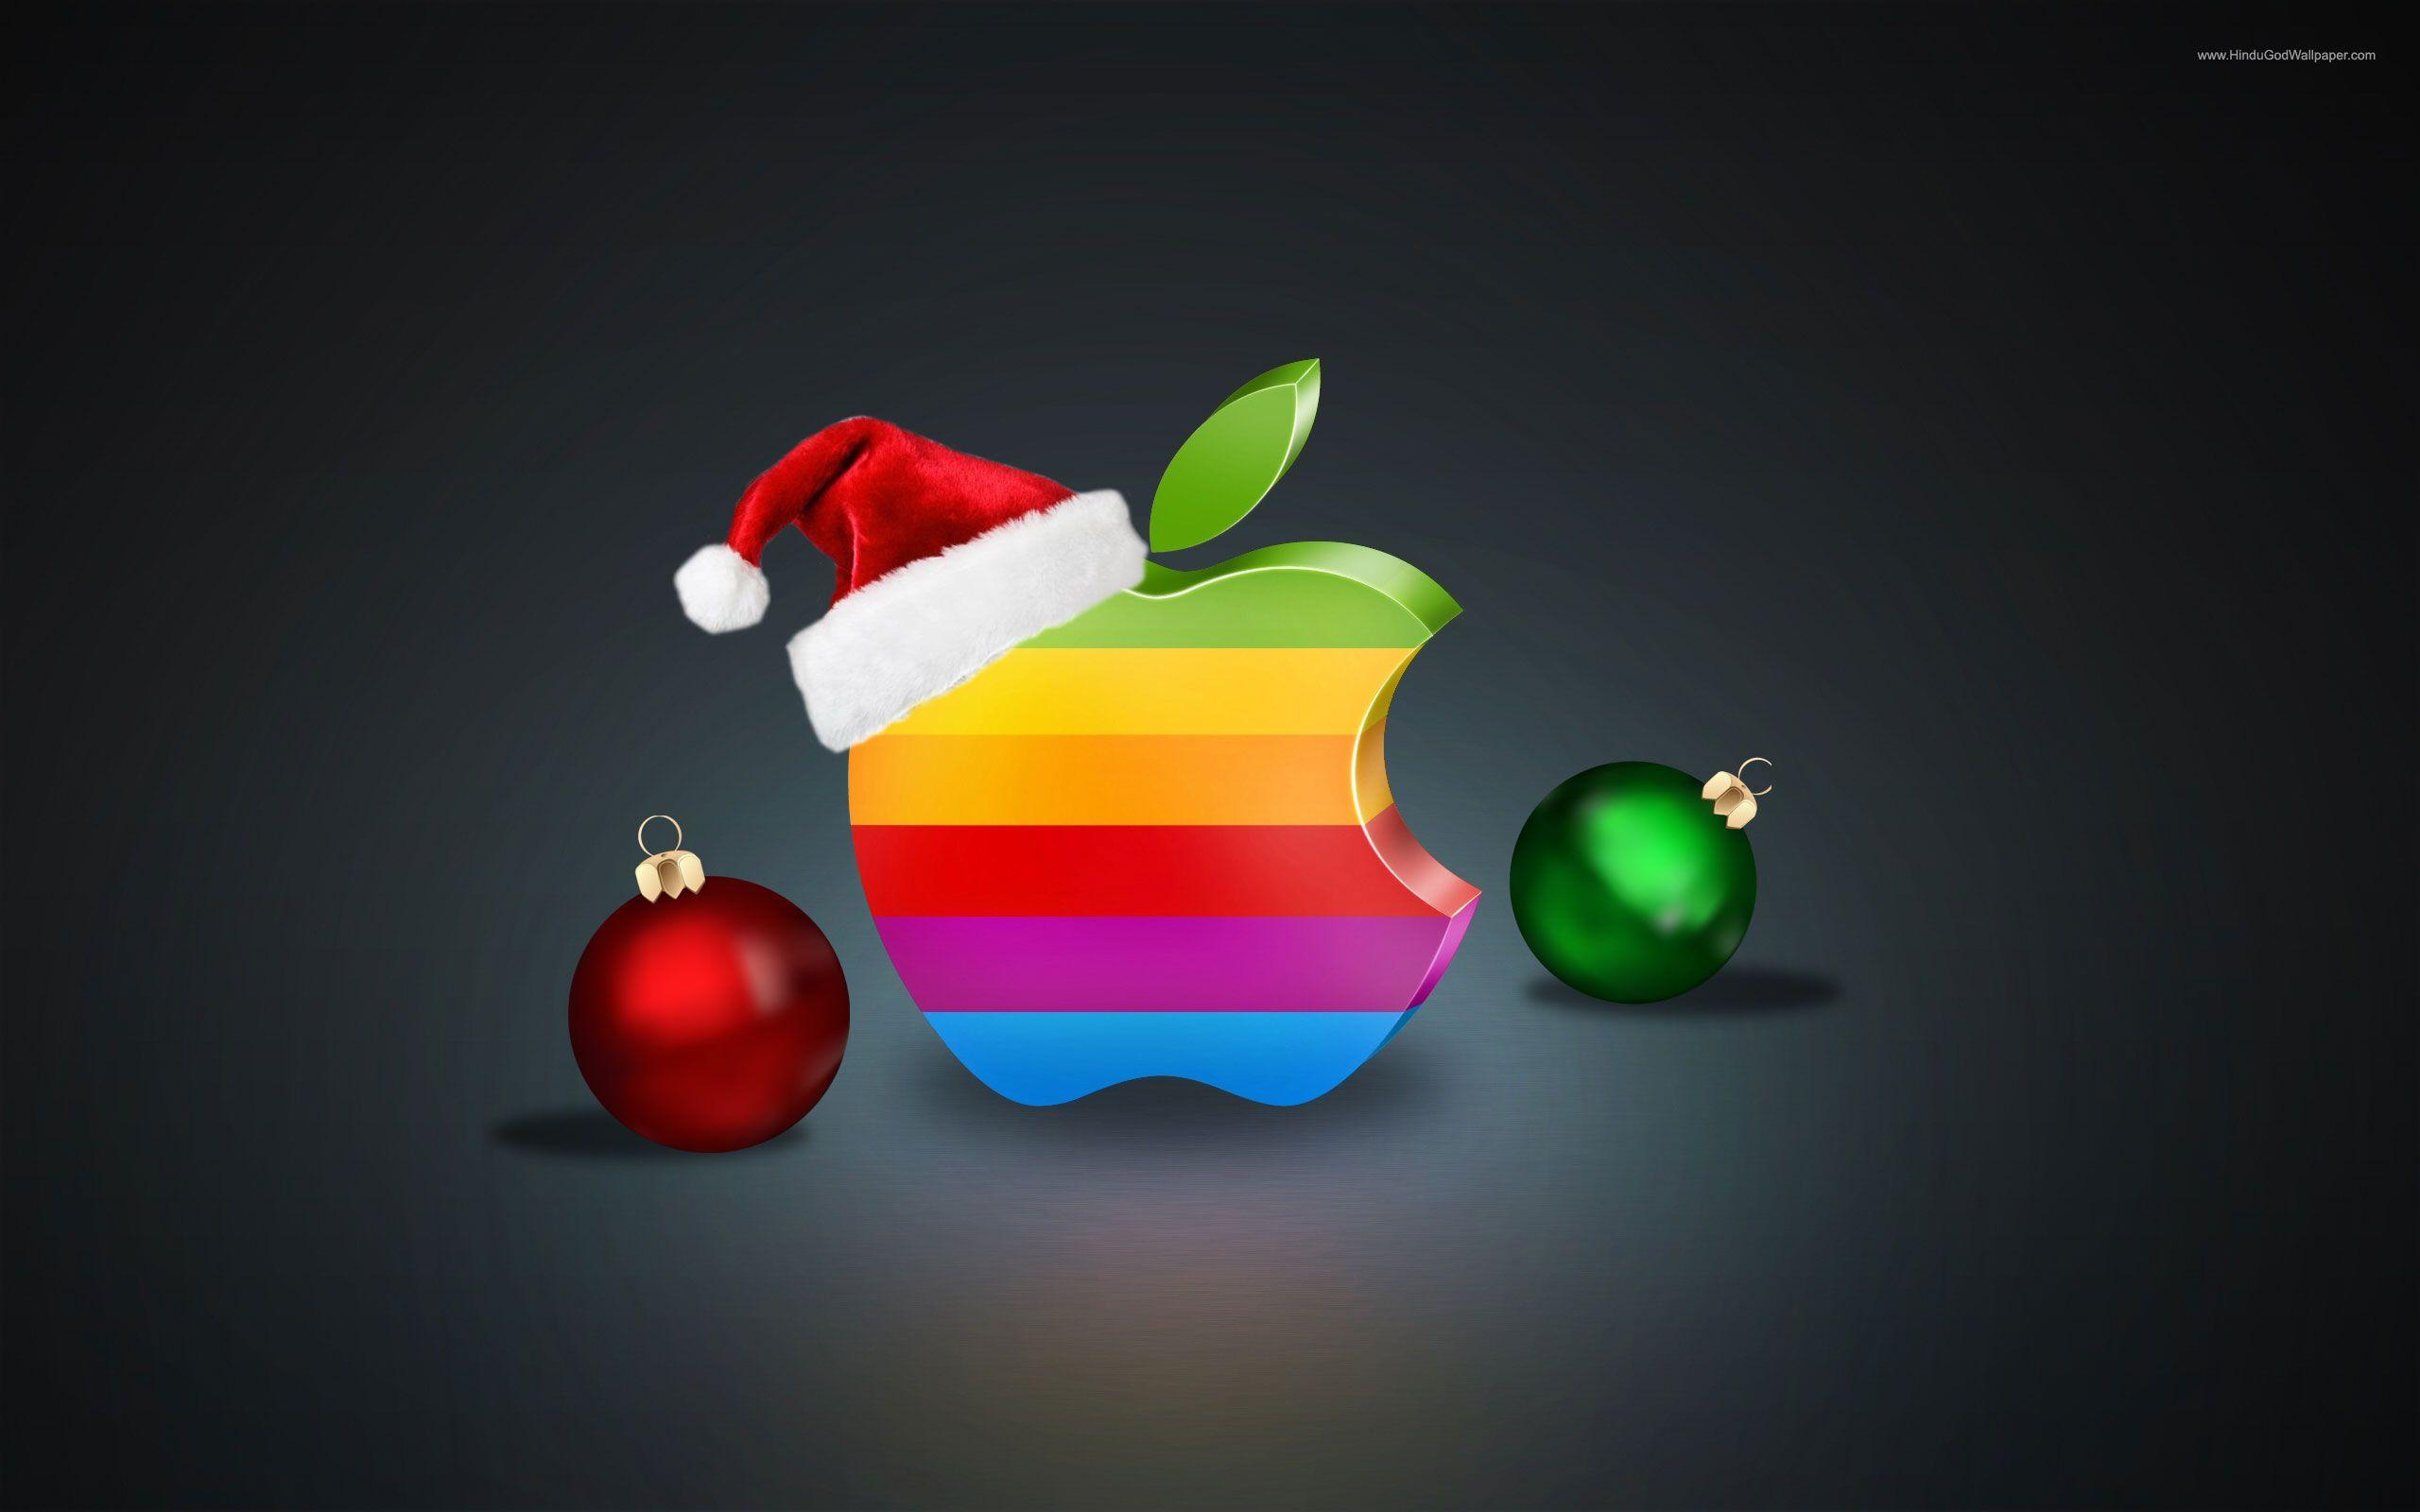 Details 51+ christmas apple watch wallpaper - in.cdgdbentre